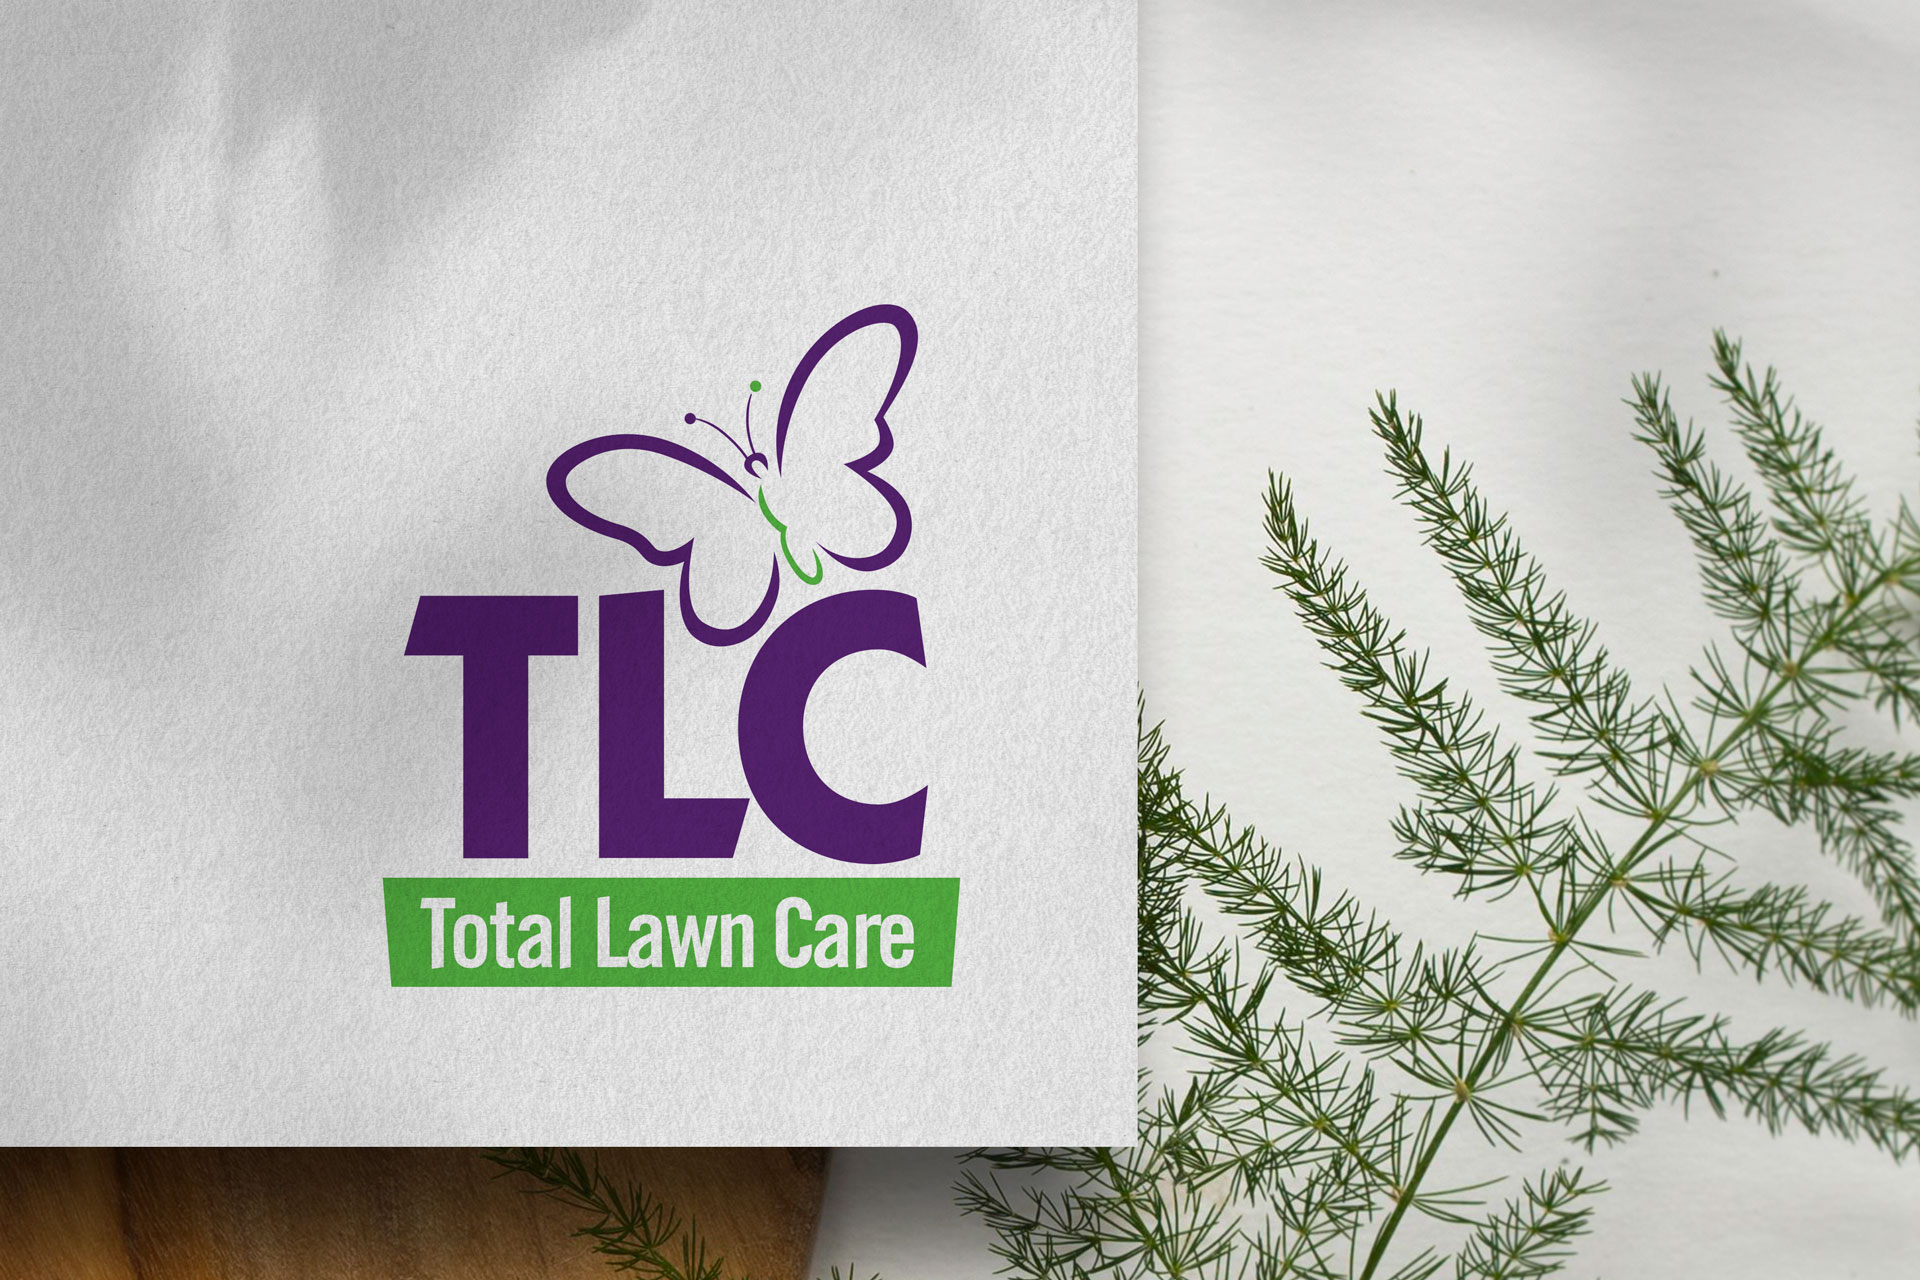 Logo, corporate identity, website, advertising, direct mail, vehicle design, digital marketing for TLC Total Lawn Care, commercial landscaping company in Jacksonville, FL